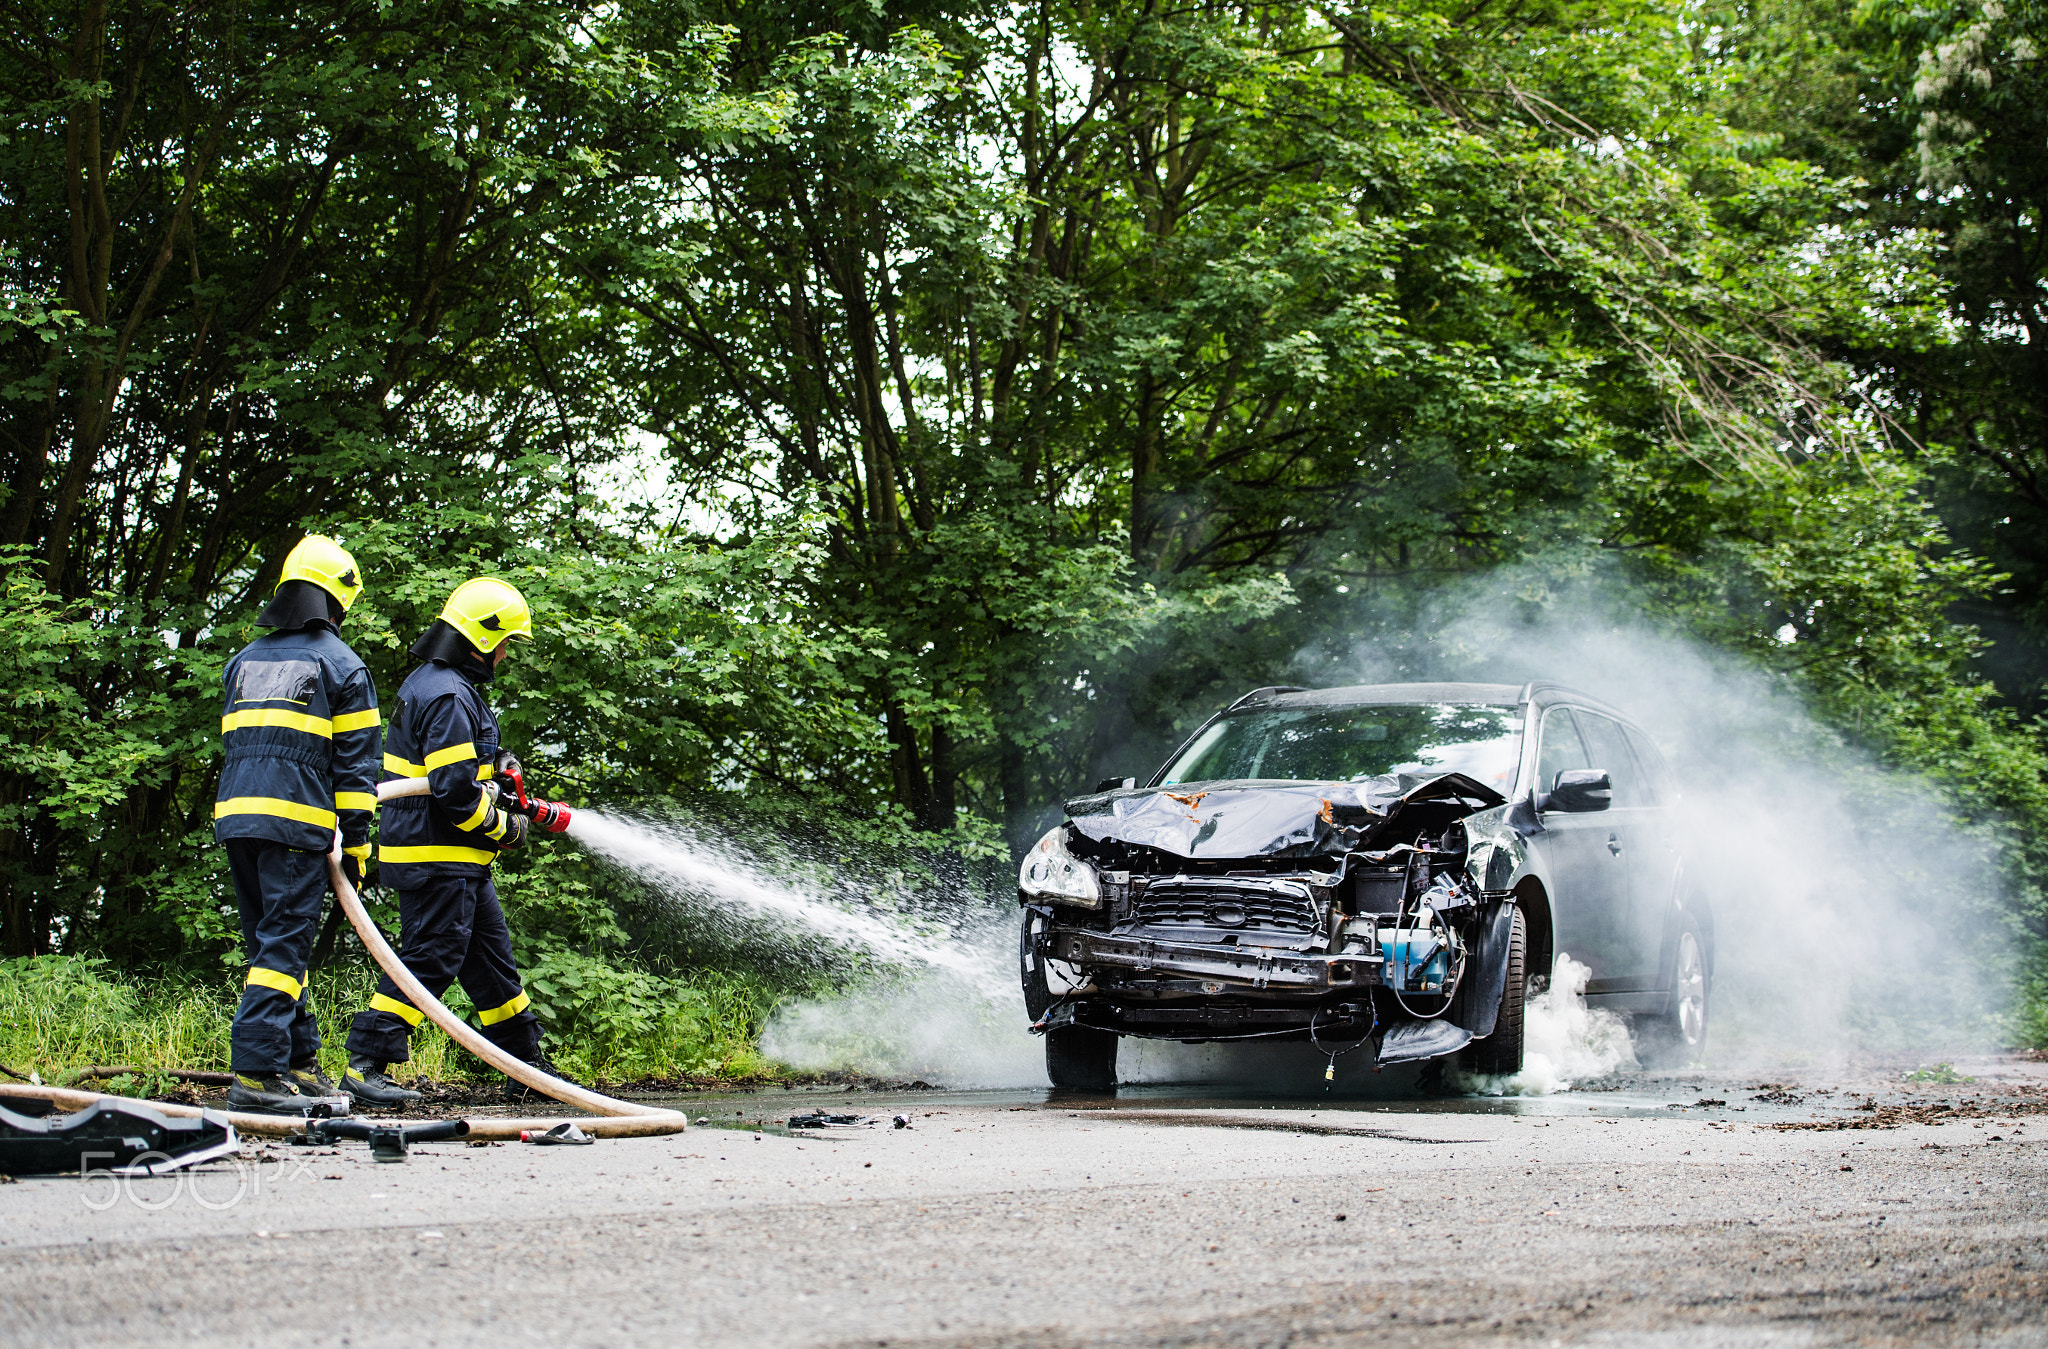 Two firefighters extinguishing a burning car after an accident.